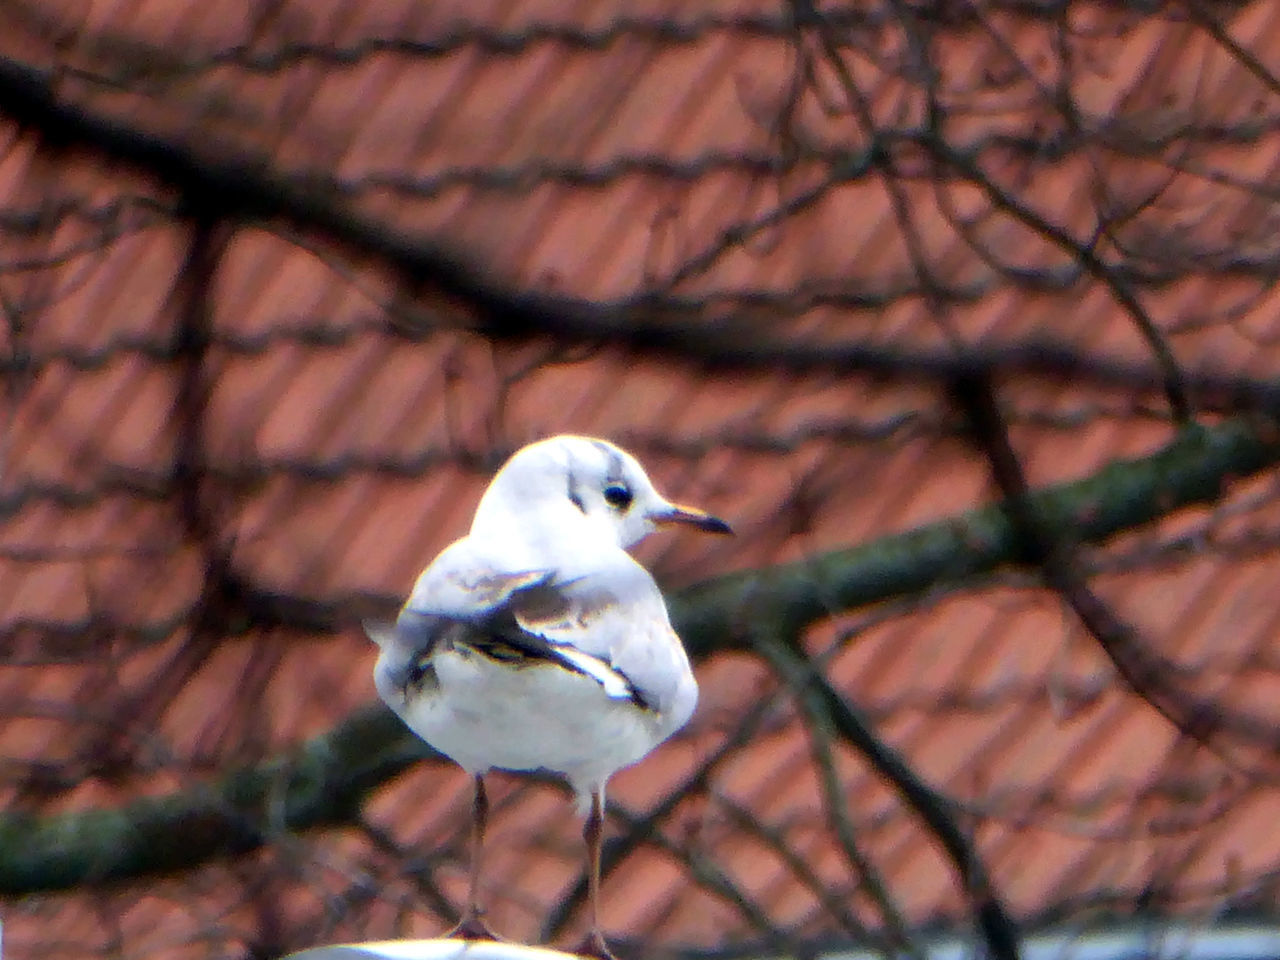 CLOSE-UP OF BIRD PERCHING ON OUTDOORS